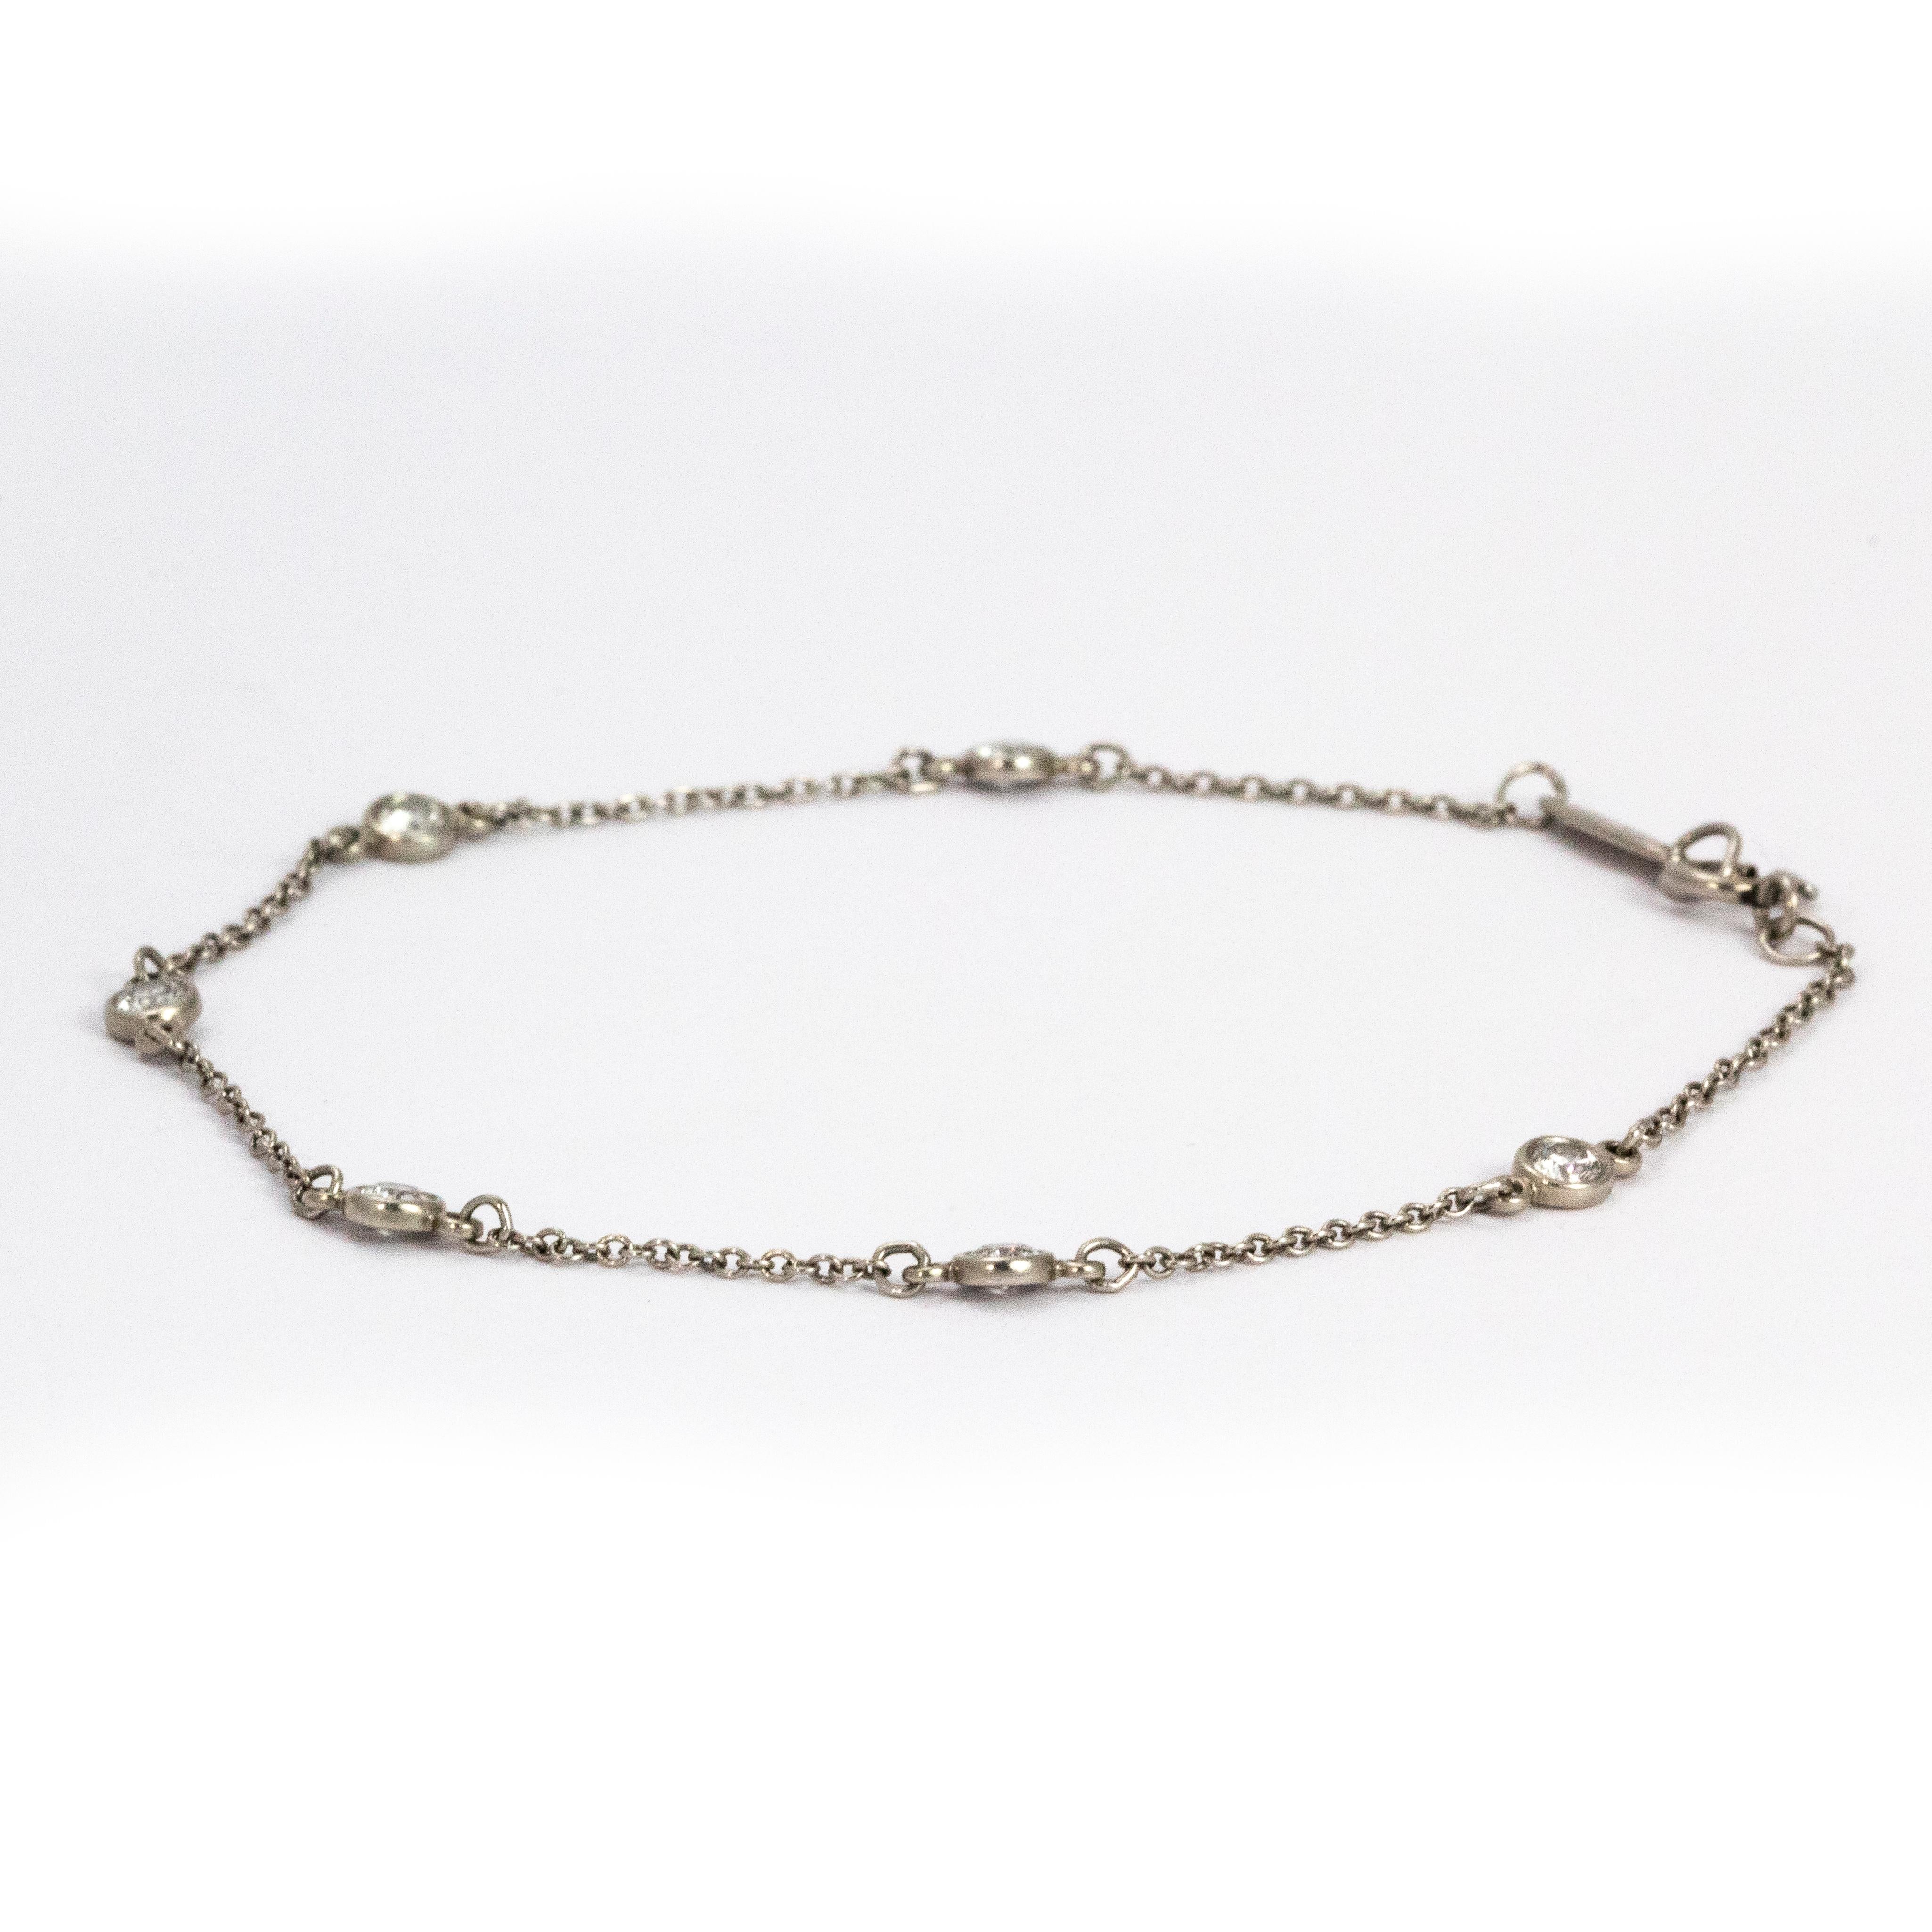 Delicate and beautiful Tiffany & co Diamond and platinum bracelet. Simply stunning!

Length: 6 1/3 inches